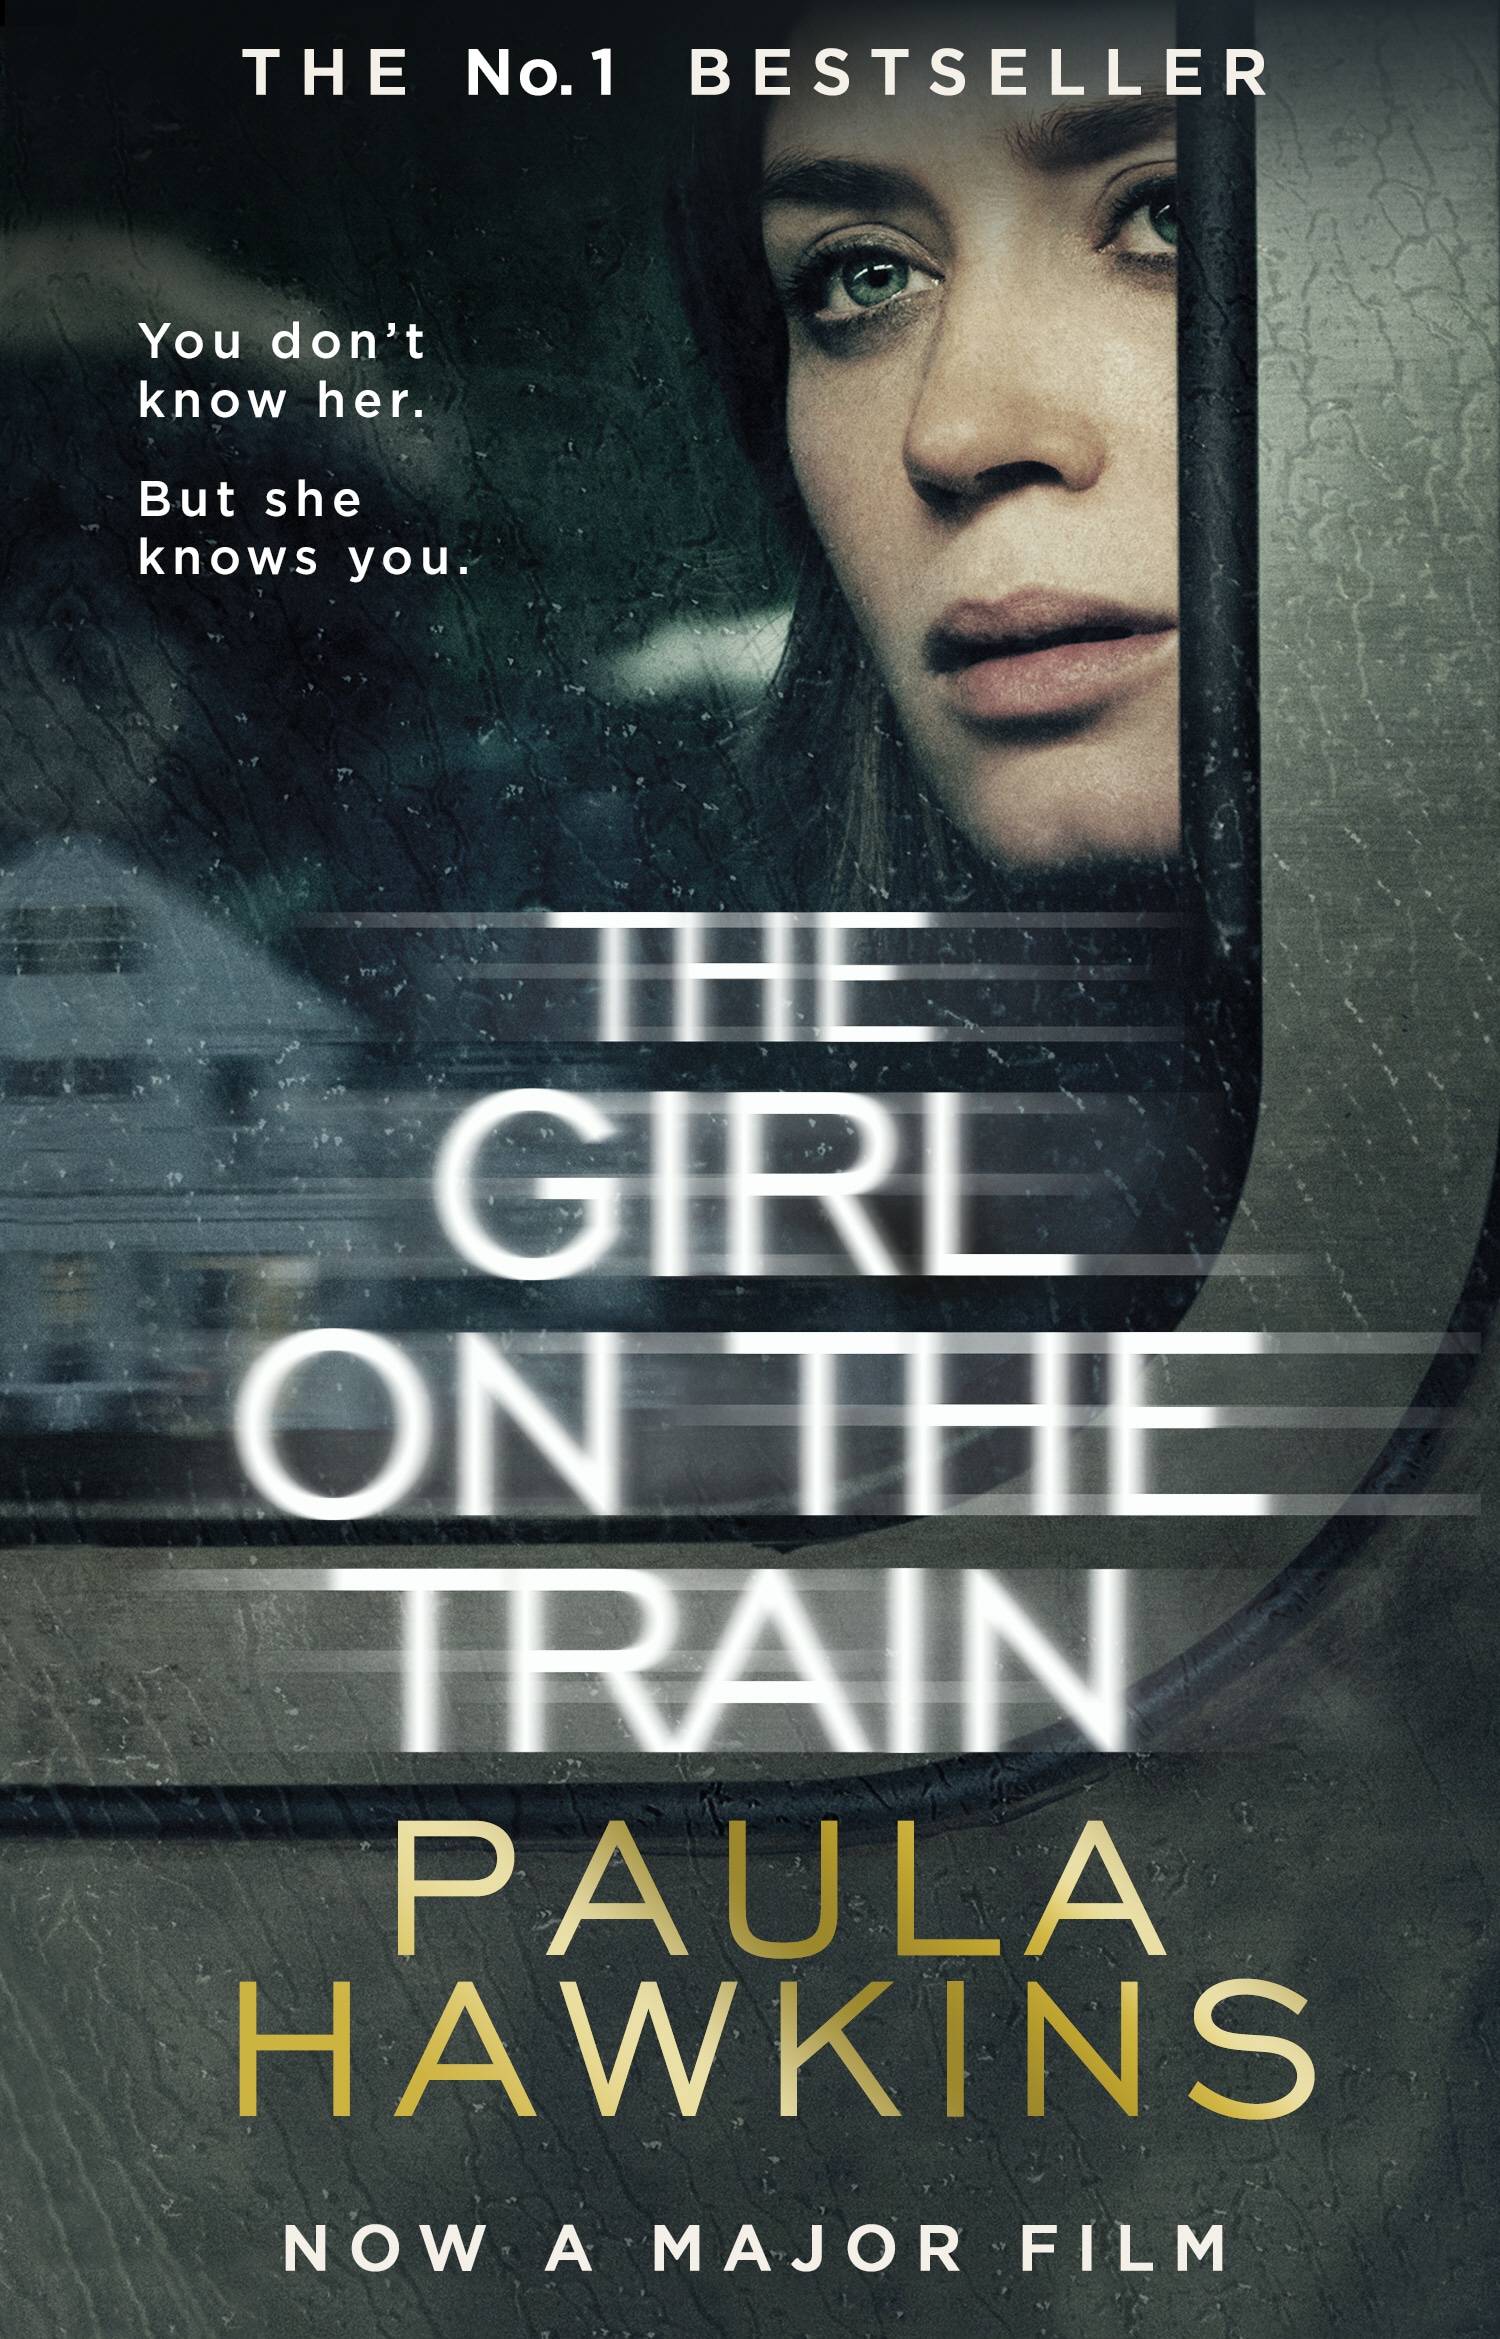 Book “The Girl on the Train” by Paula Hawkins — September 8, 2016